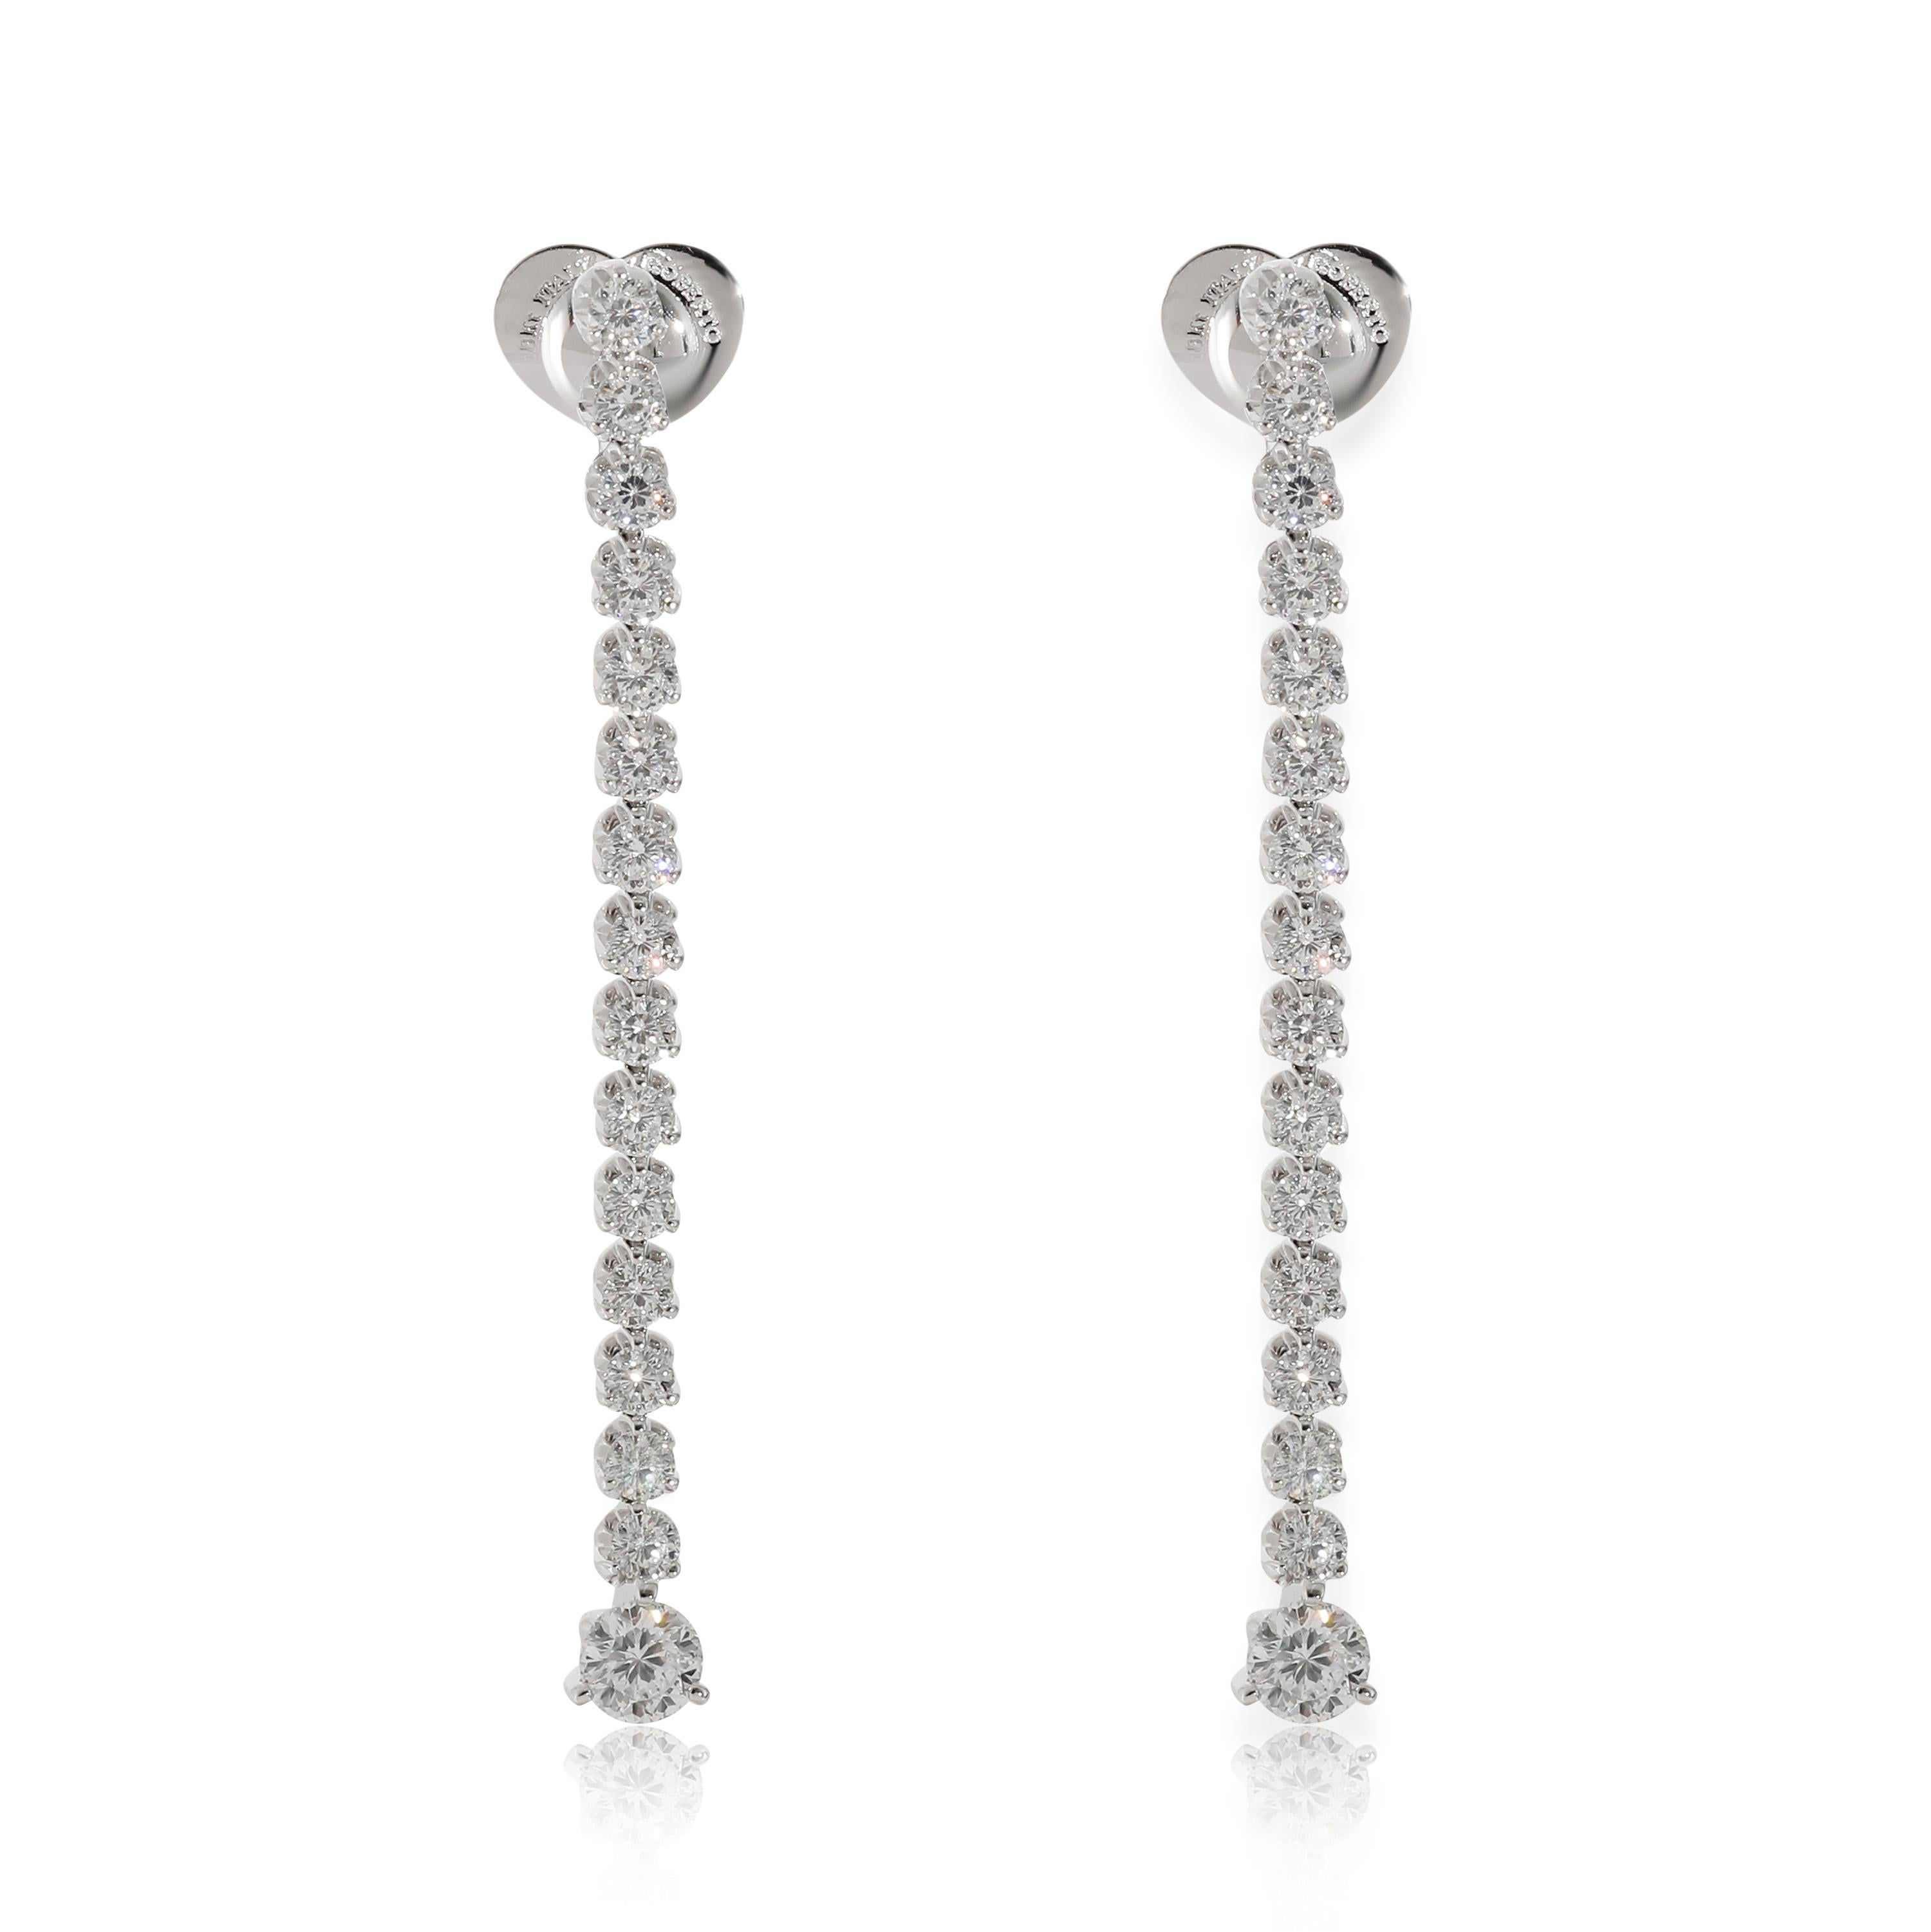 Roberto Coin Tulip Duster Drop Diamond Earrings in 18k White Gold 4.23 CTW In Excellent Condition For Sale In New York, NY